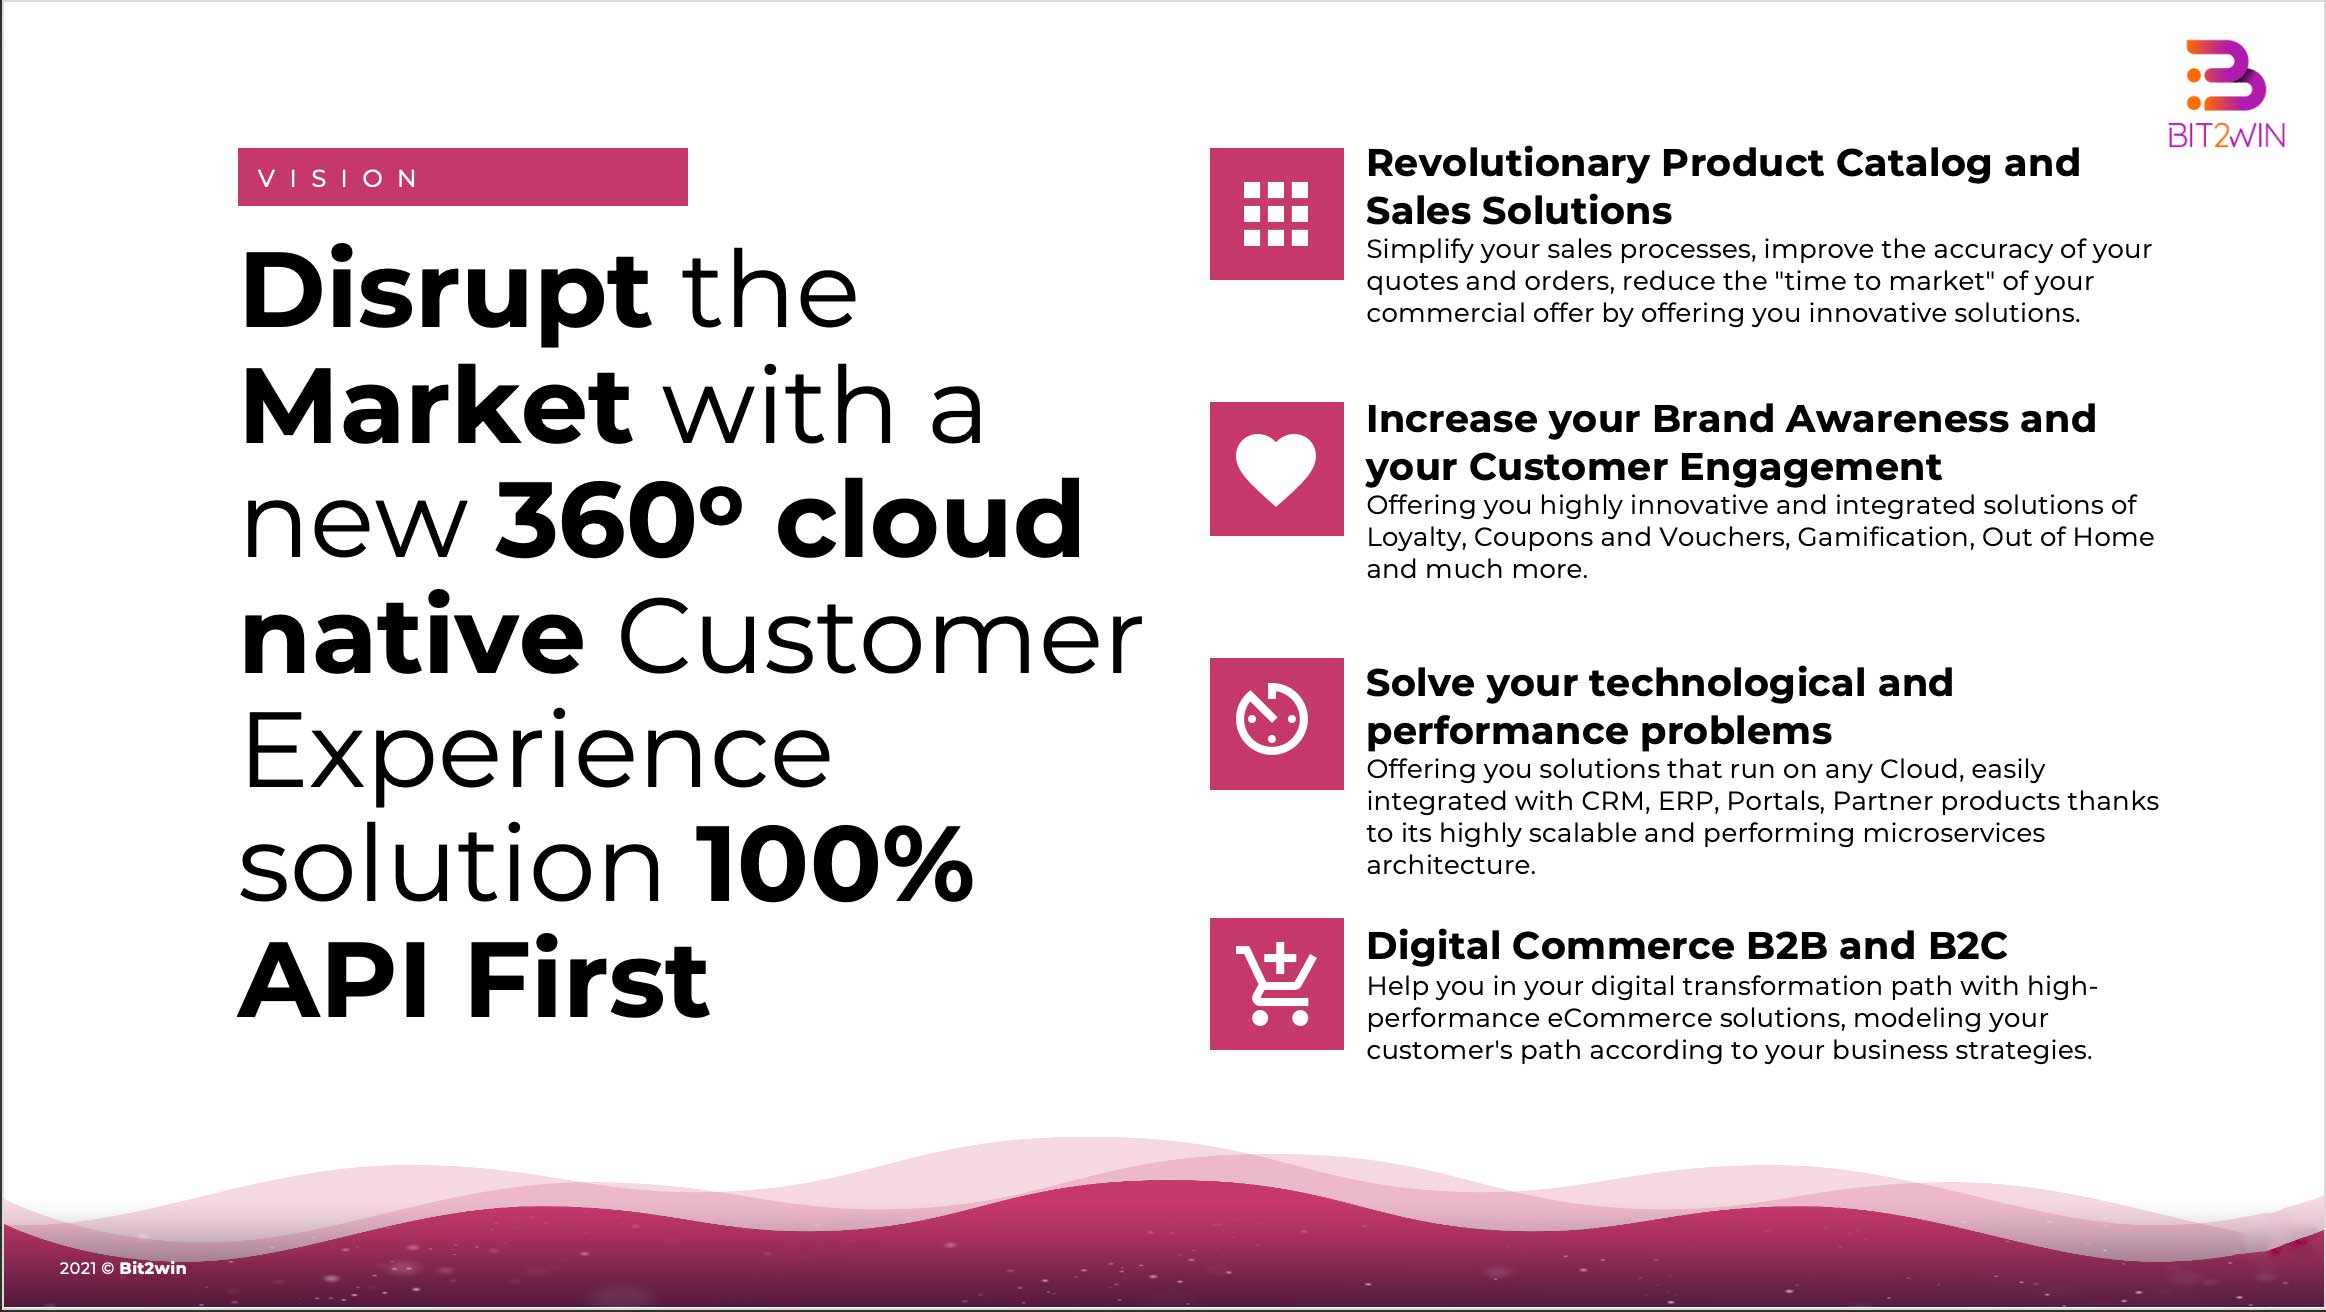 Bit2win CPQ software is a cloud Configure, Price and Quote solution that addresses key vertical industry needs and provide innovative customer experience. It automates and digitalizes end-to-end processes.